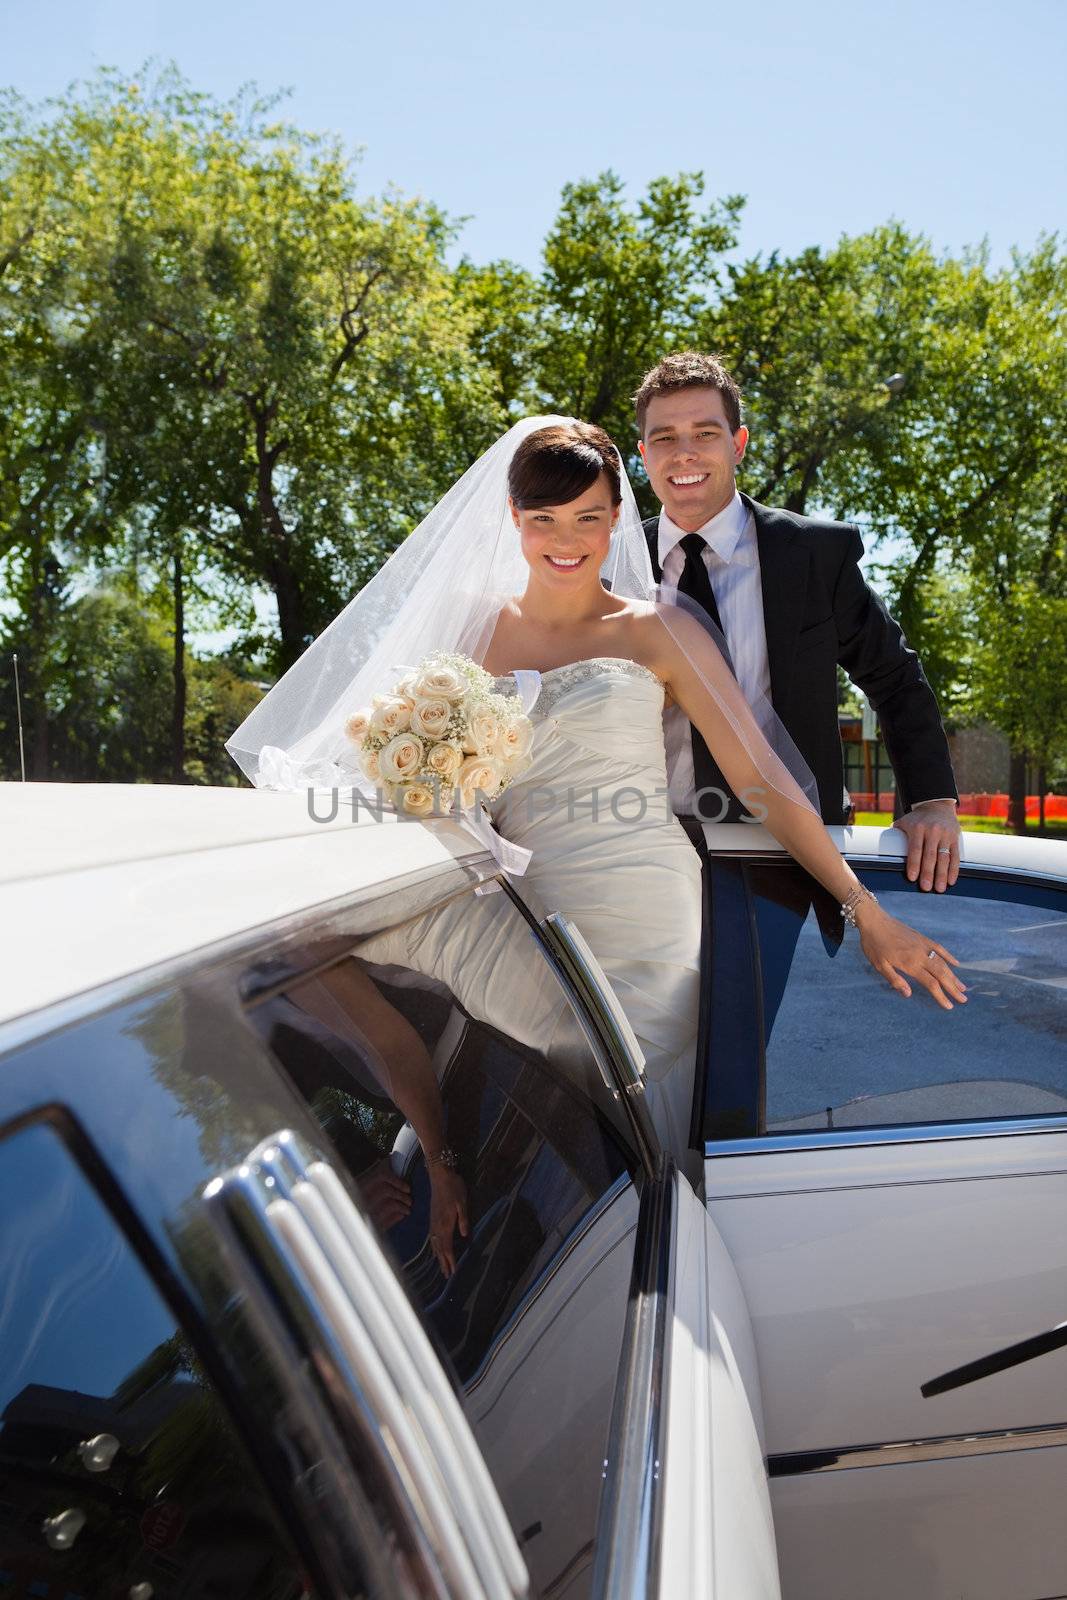 Wedding Couple with Limousine by leaf